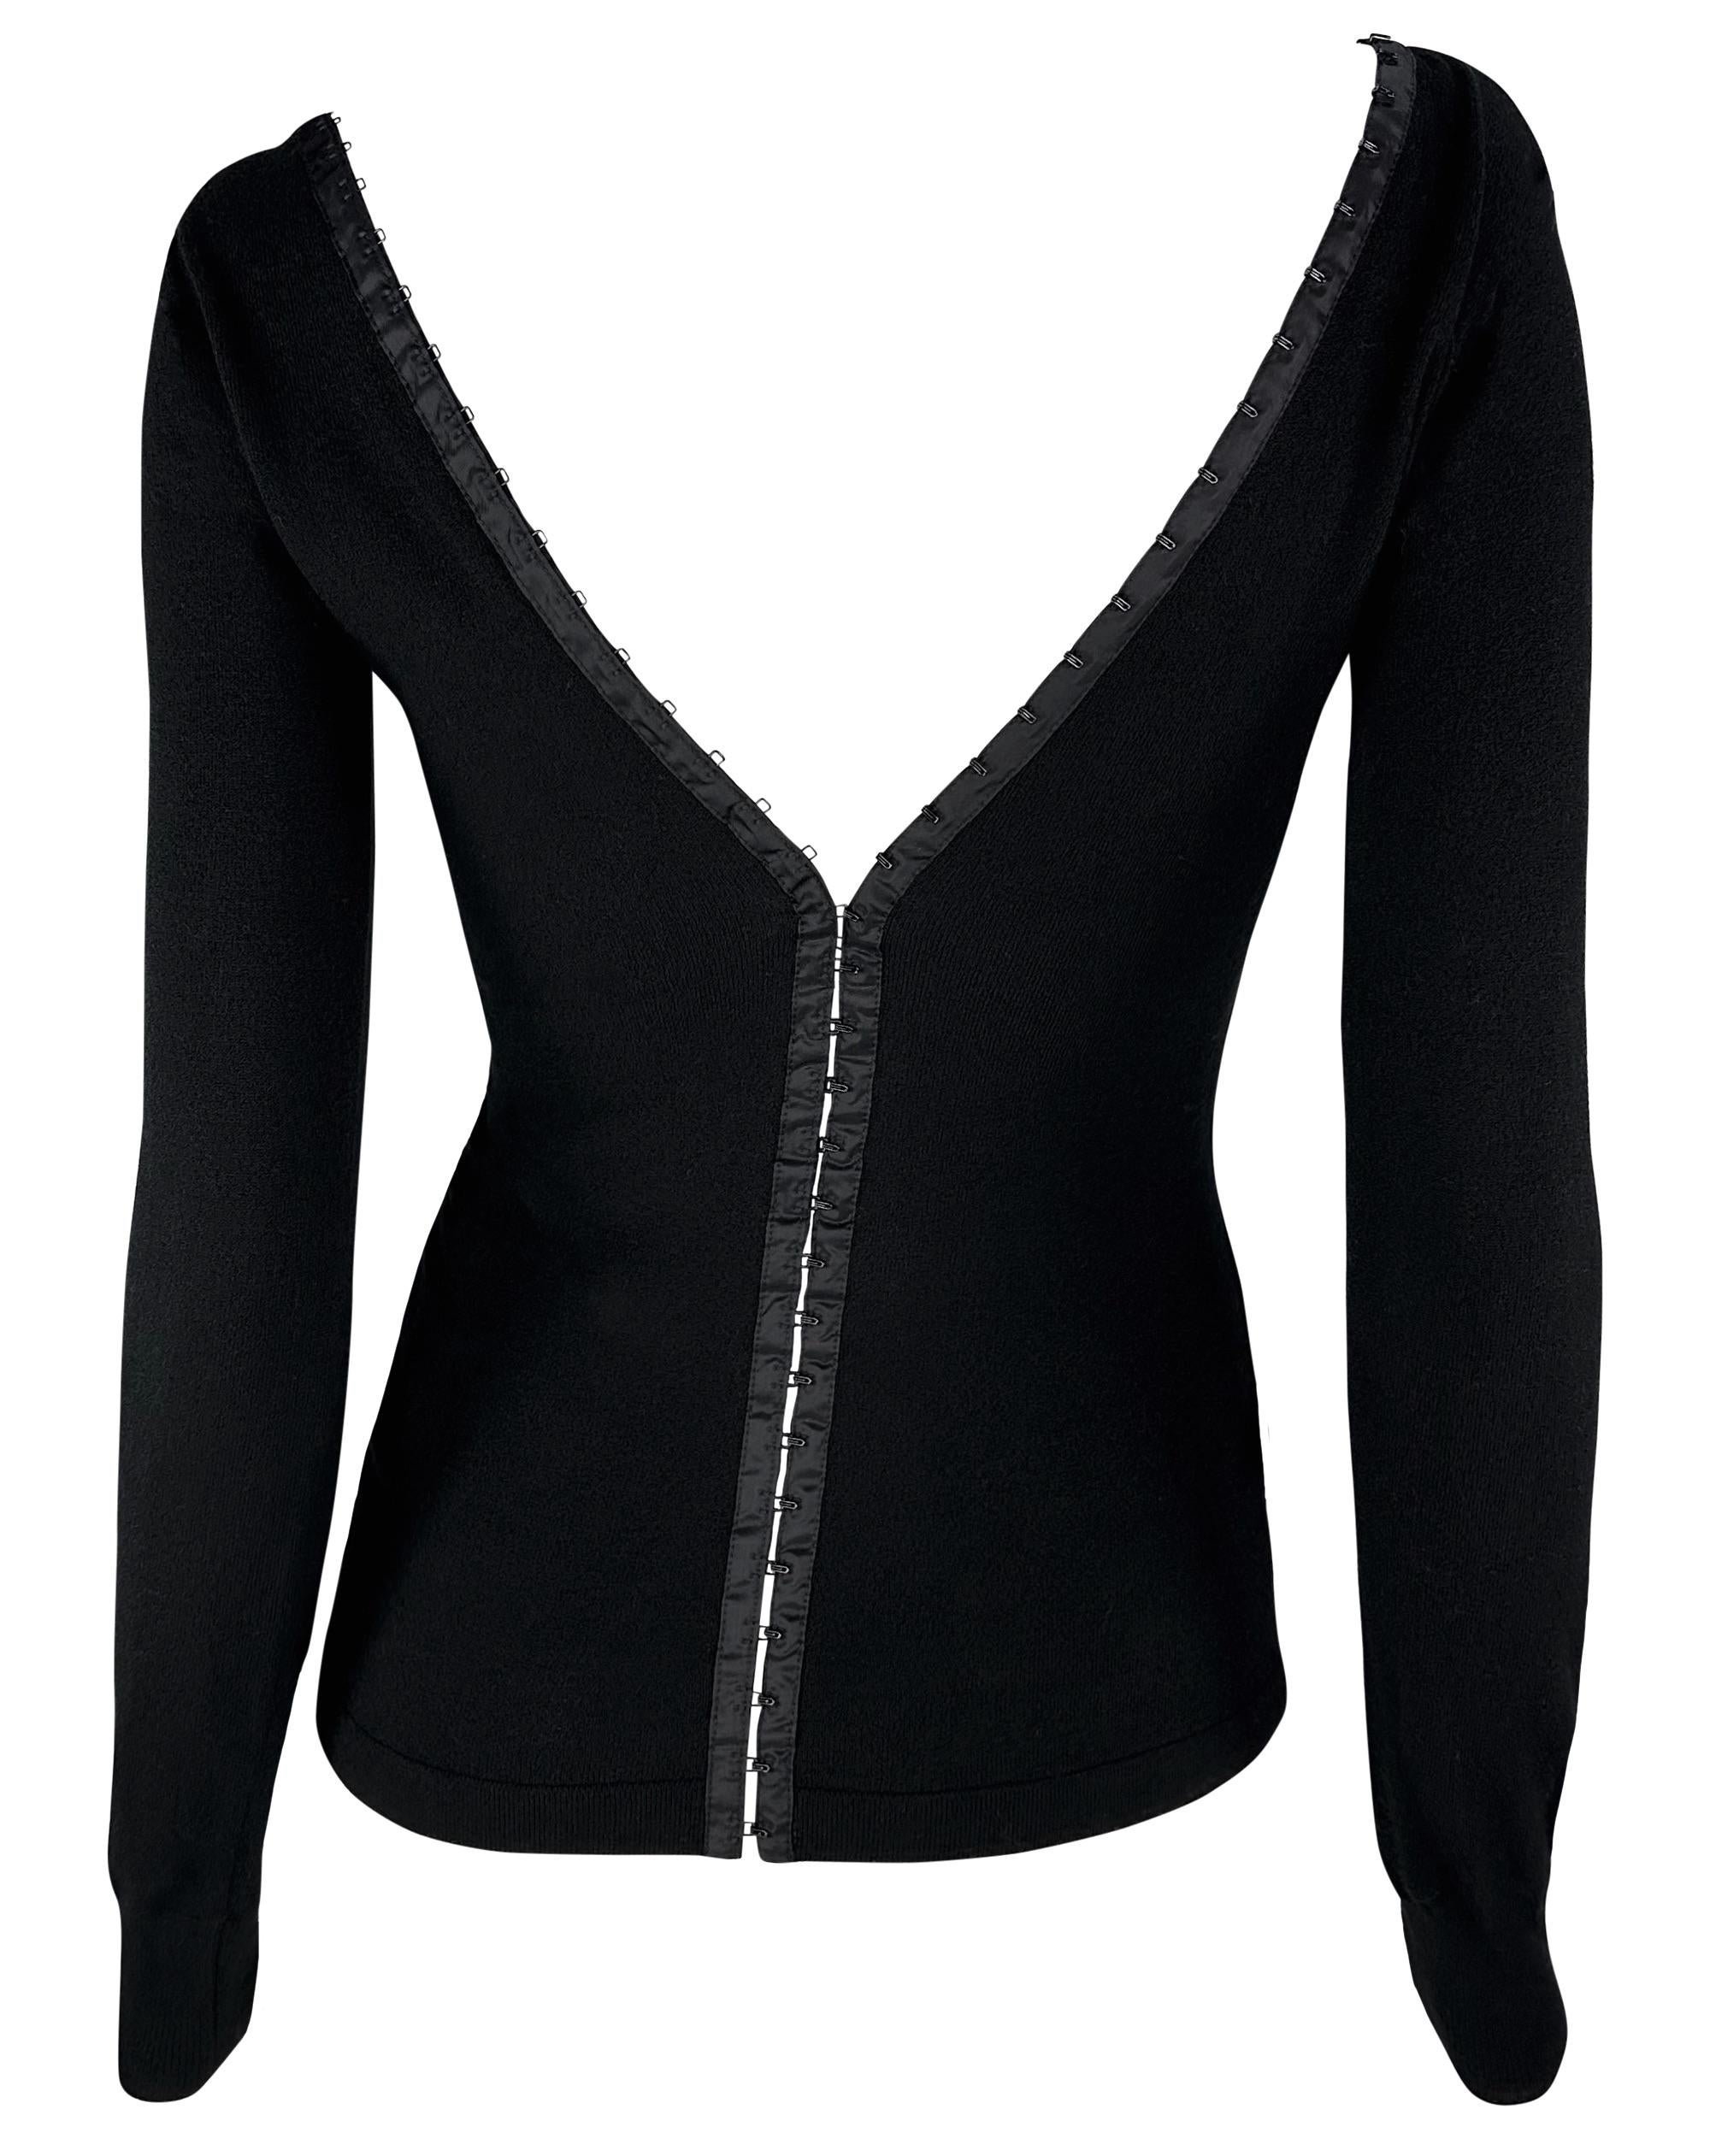 S/S 2003 Dolce & Gabbana Hook & Eye Plunging Black Bodycon Knit Long-Sleeve Top For Sale 2